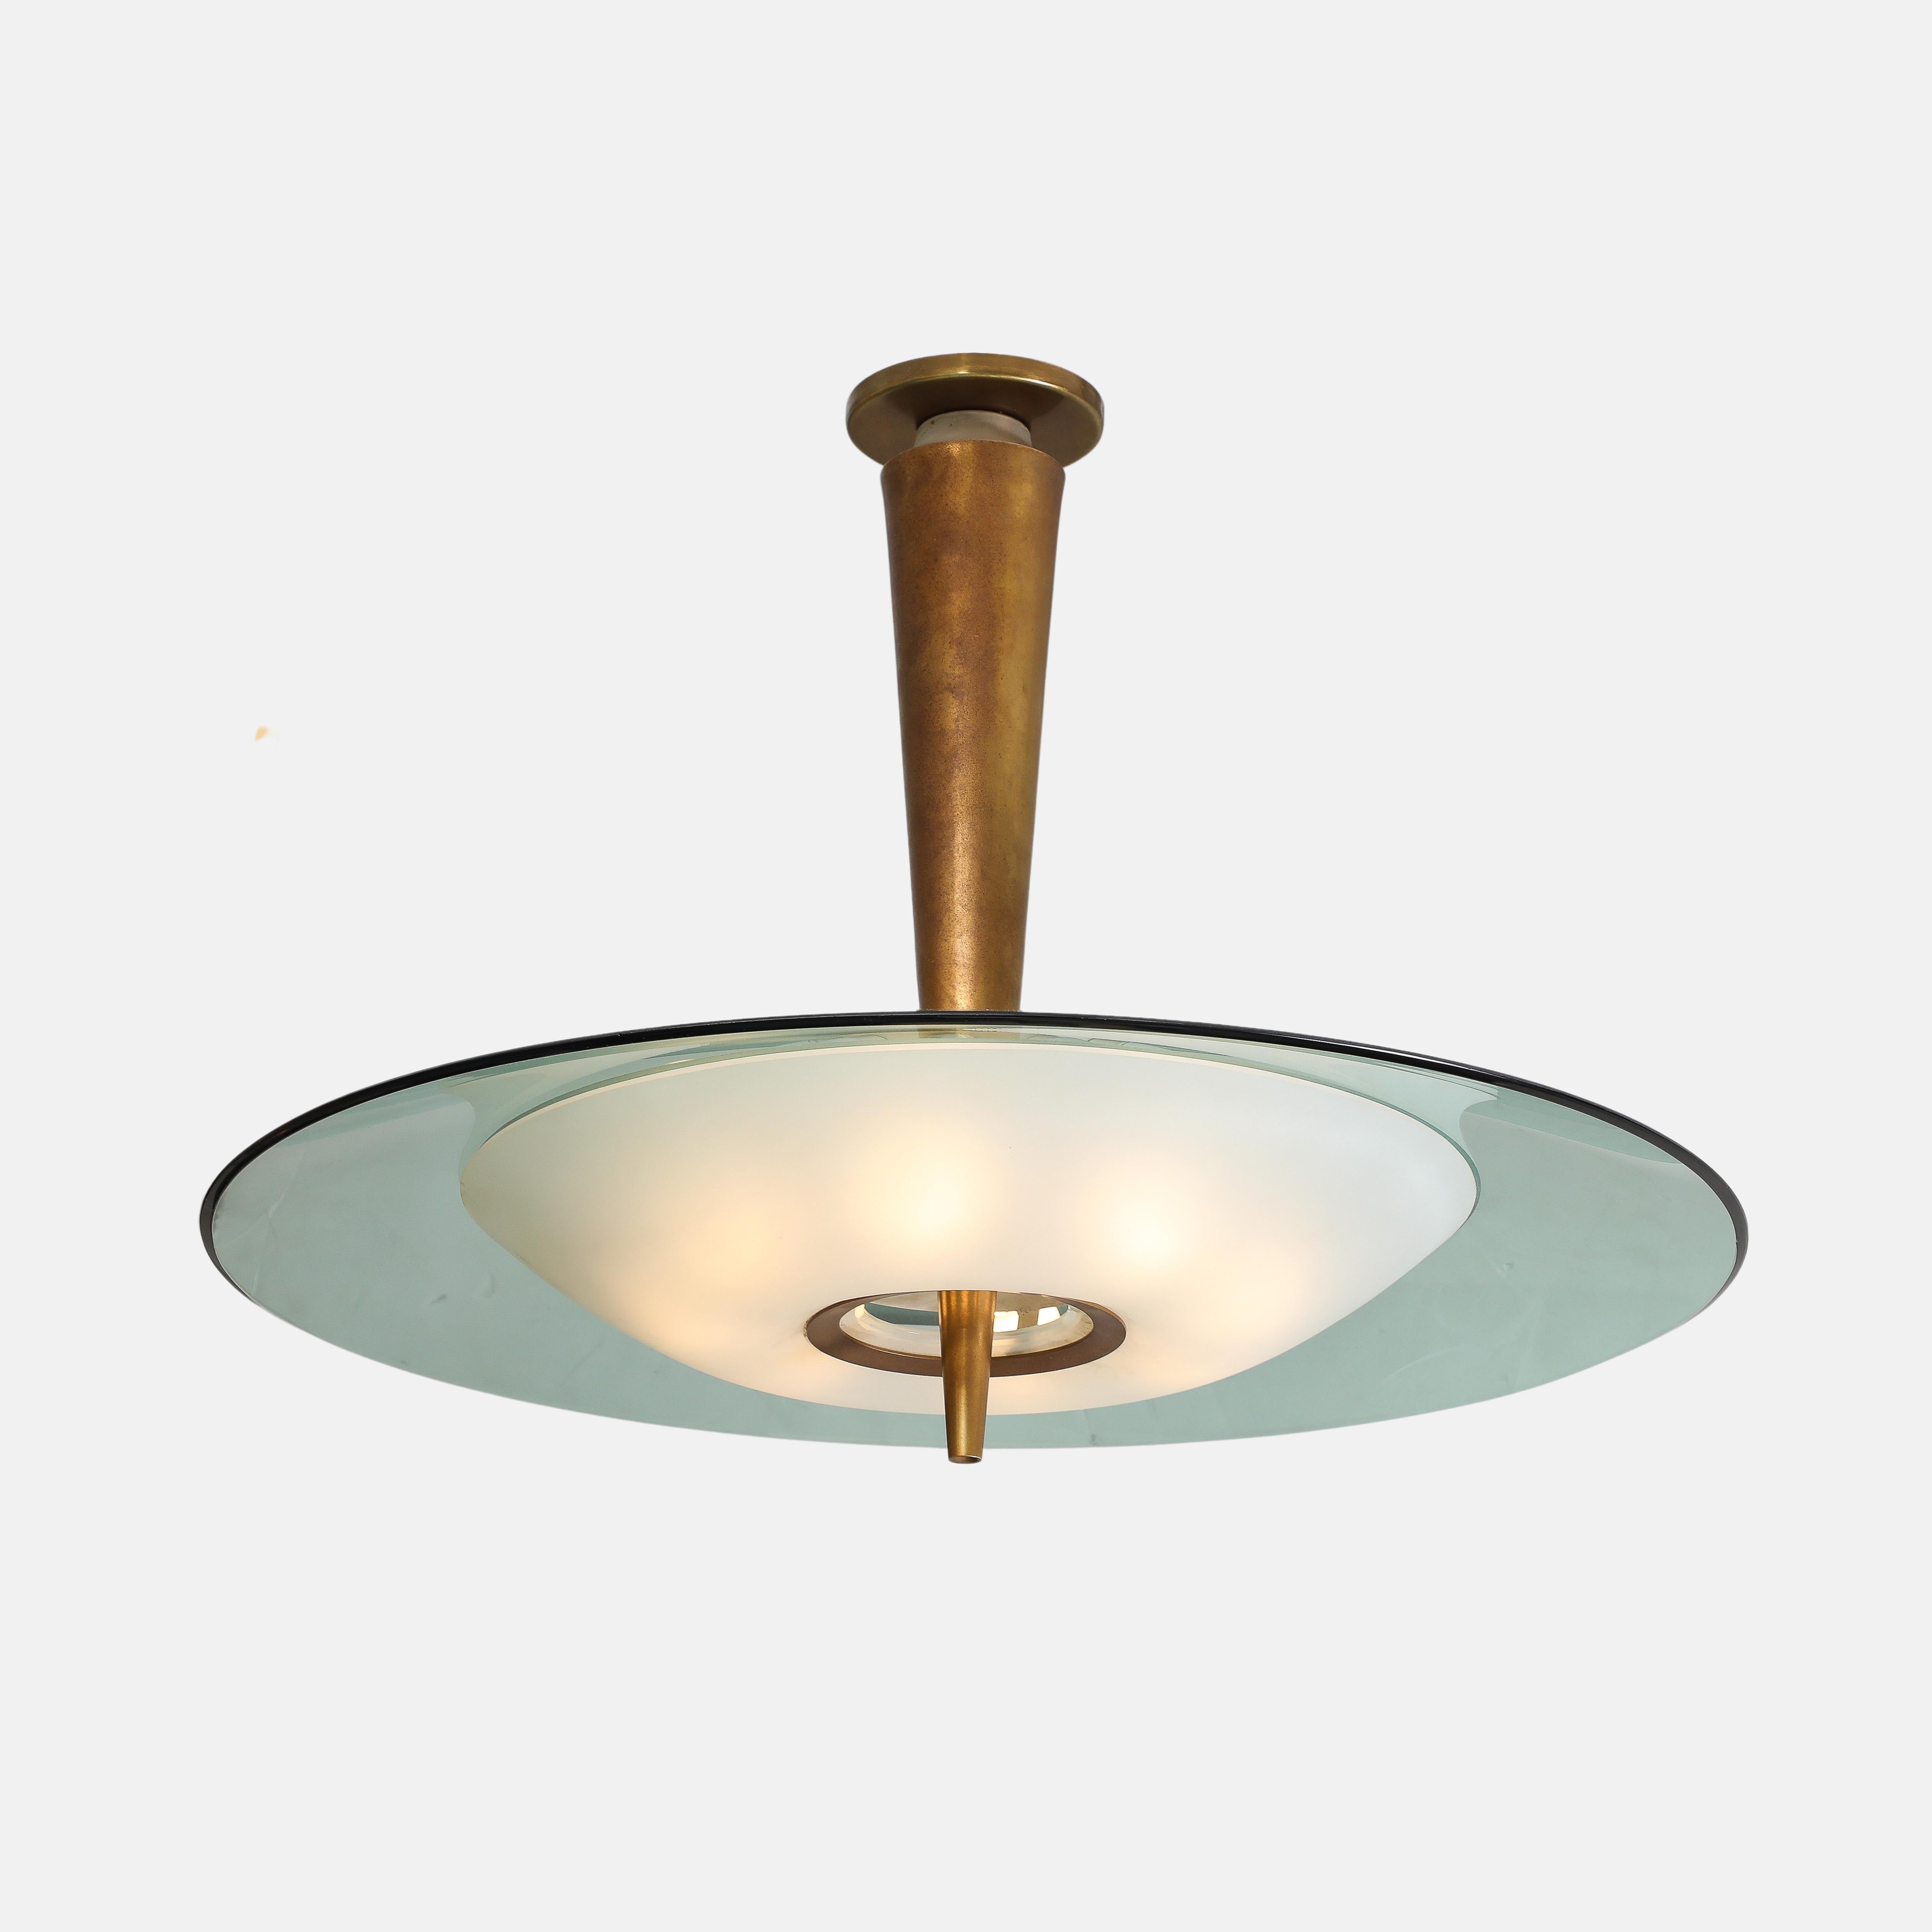 Max Ingrand for Fontana Arte rare pair of pendant lights or chandeliers model 1462 each consisting of large green beveled and polished crystal glass disc and smaller frosted glass diffuser mounted on tapering lacquered brass stem.
This exquisite and